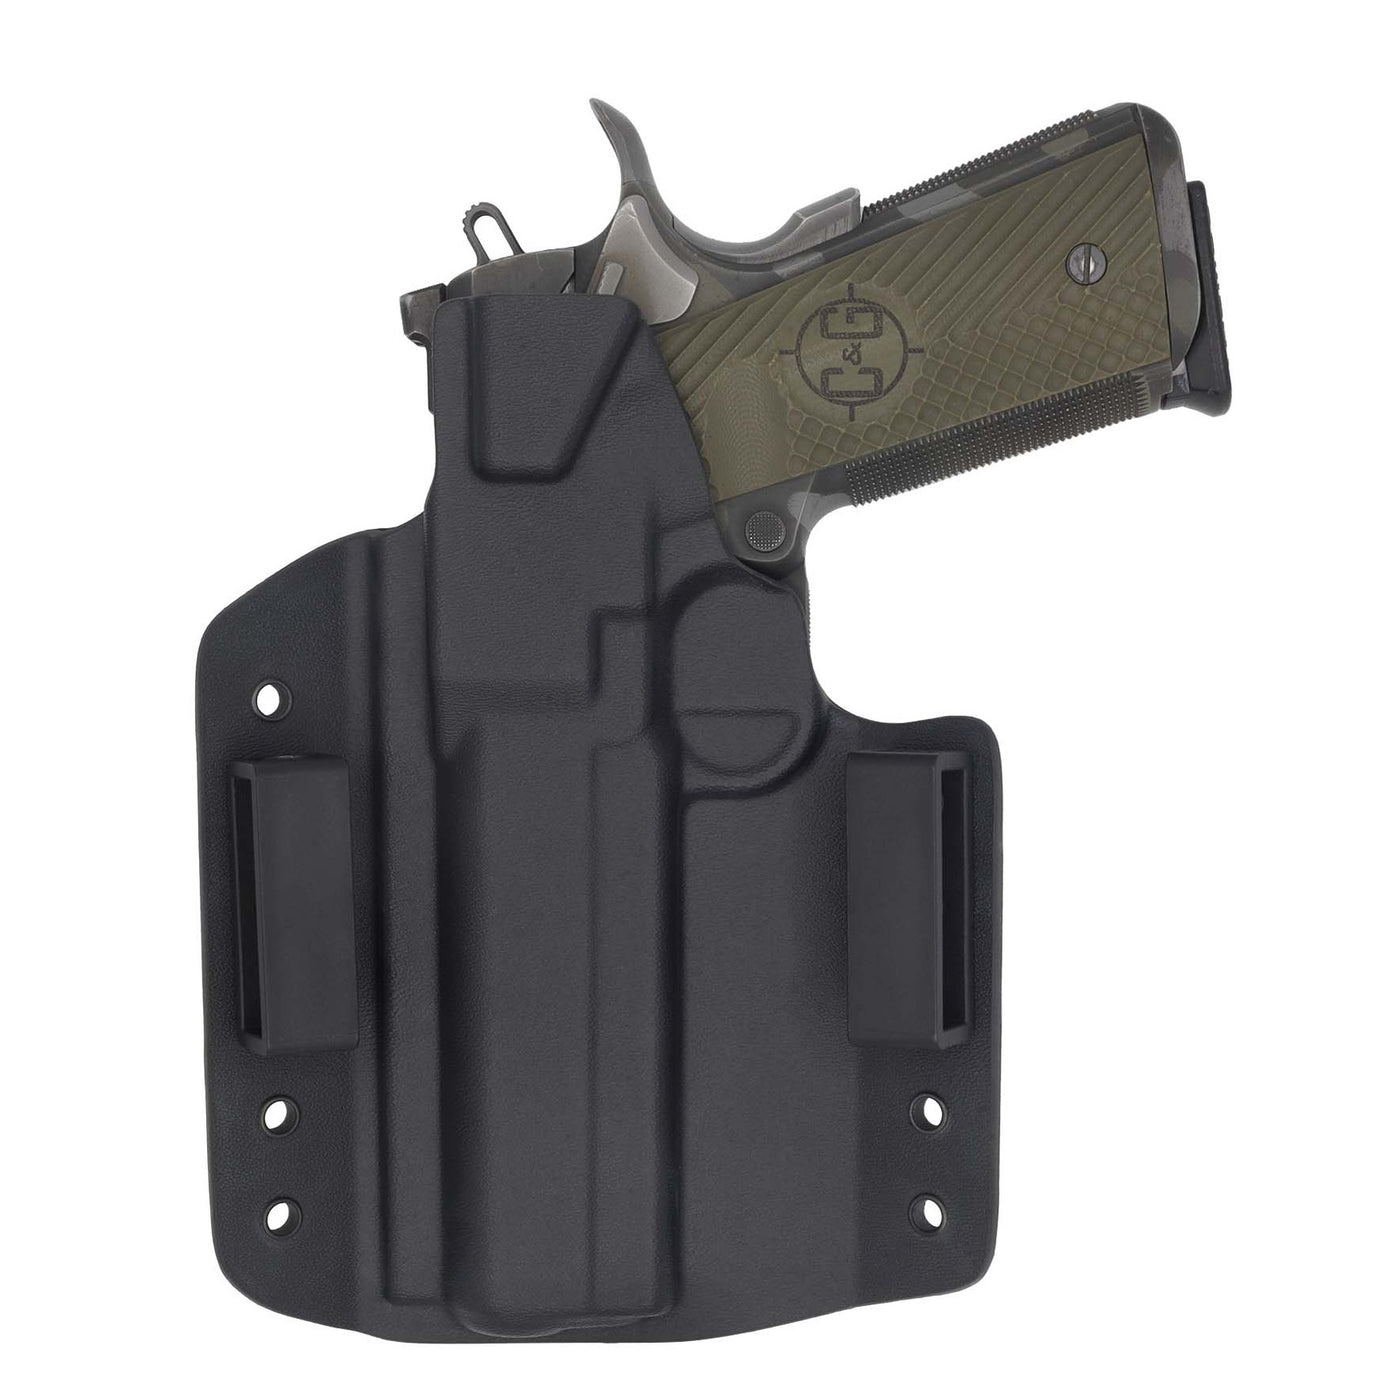 Shown is the custom C&G Holsters OWB Outside the waistband Holster for the Springfield TRP 1911.